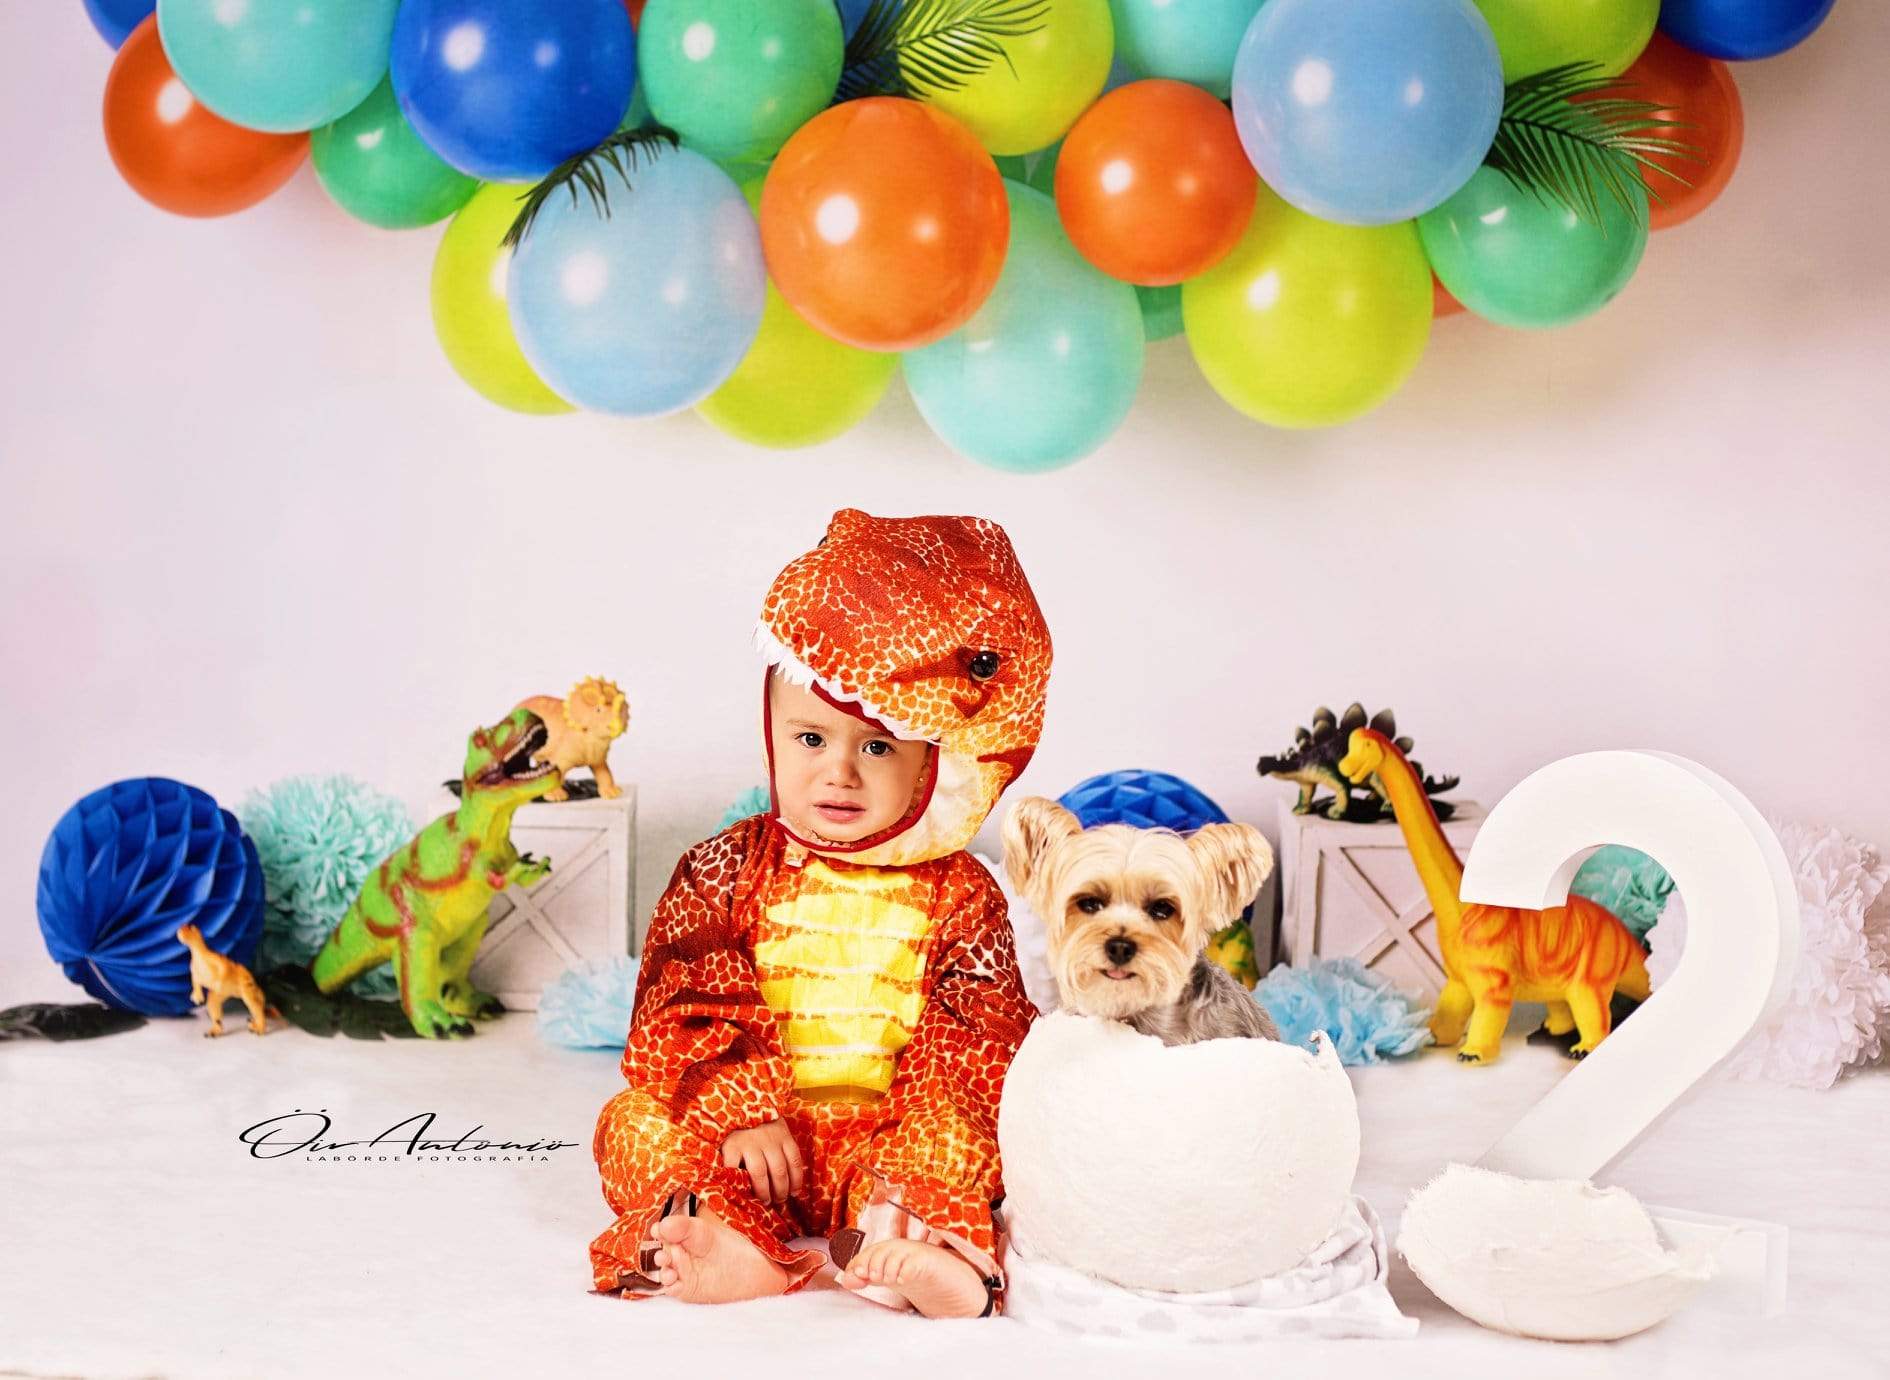 Kate Dinosaur Birthday with Balloons Backdrop for Photography Designed By Mandy Ringe Photography